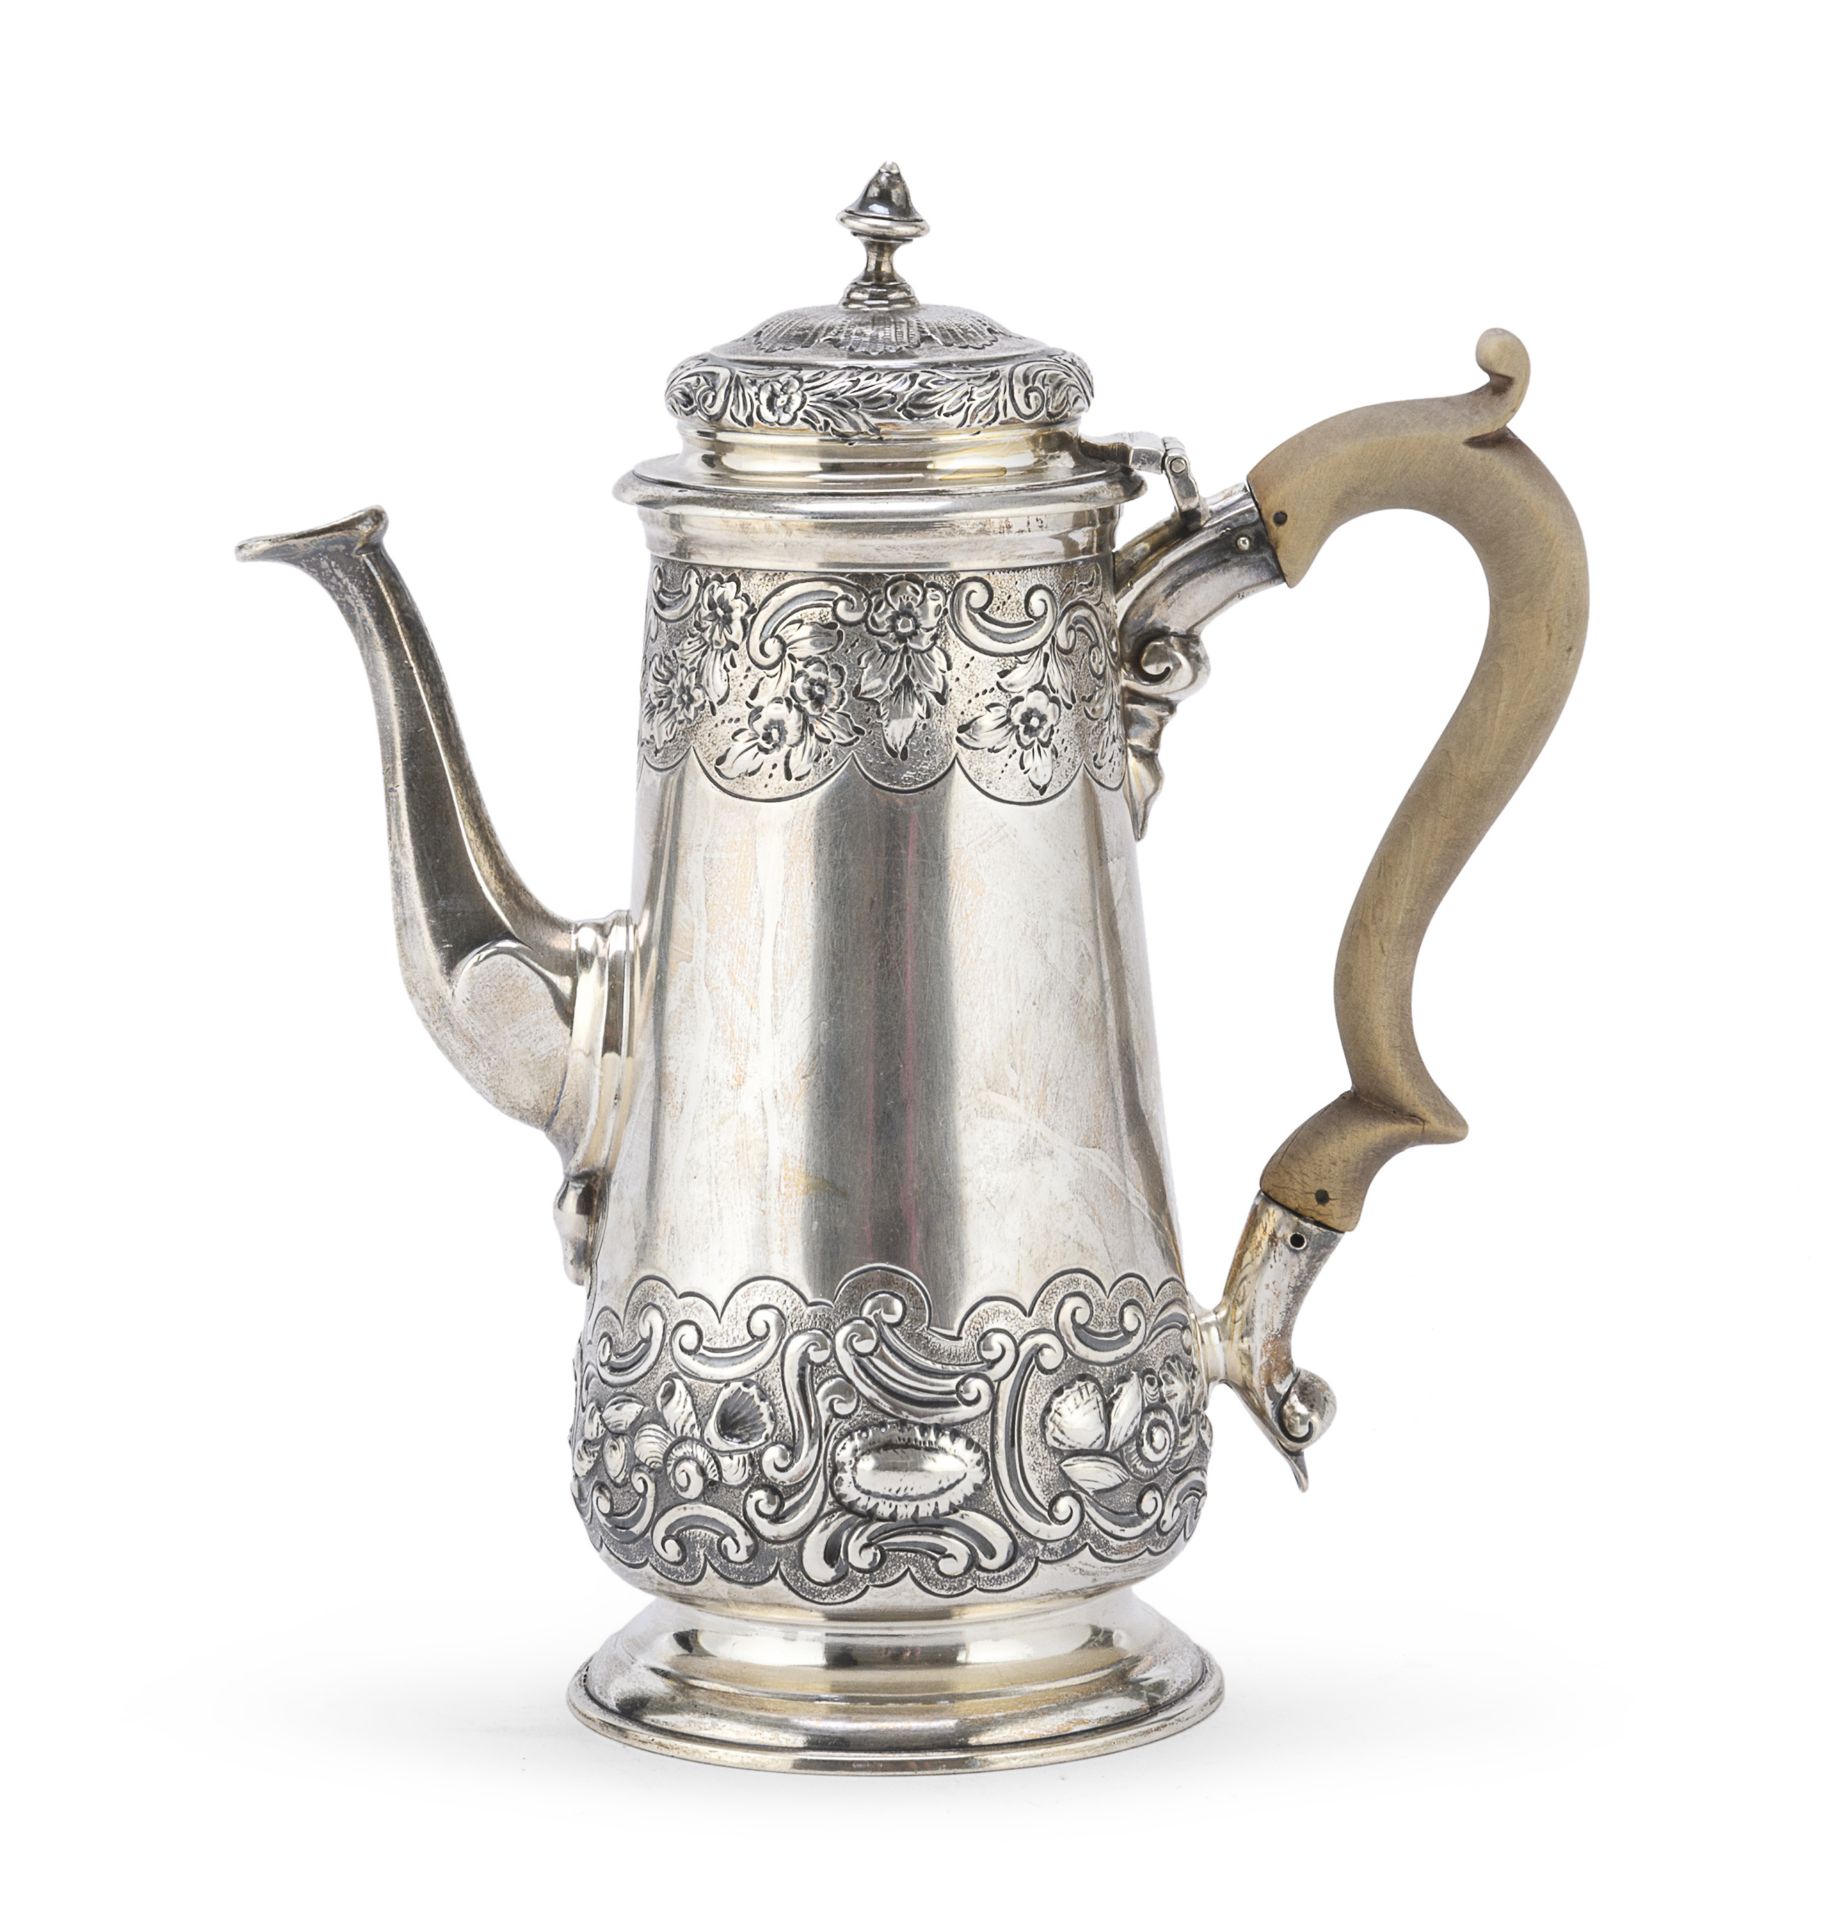 SMALL SILVER COFFEE POT LONDON EARLY 20TH CENTURY